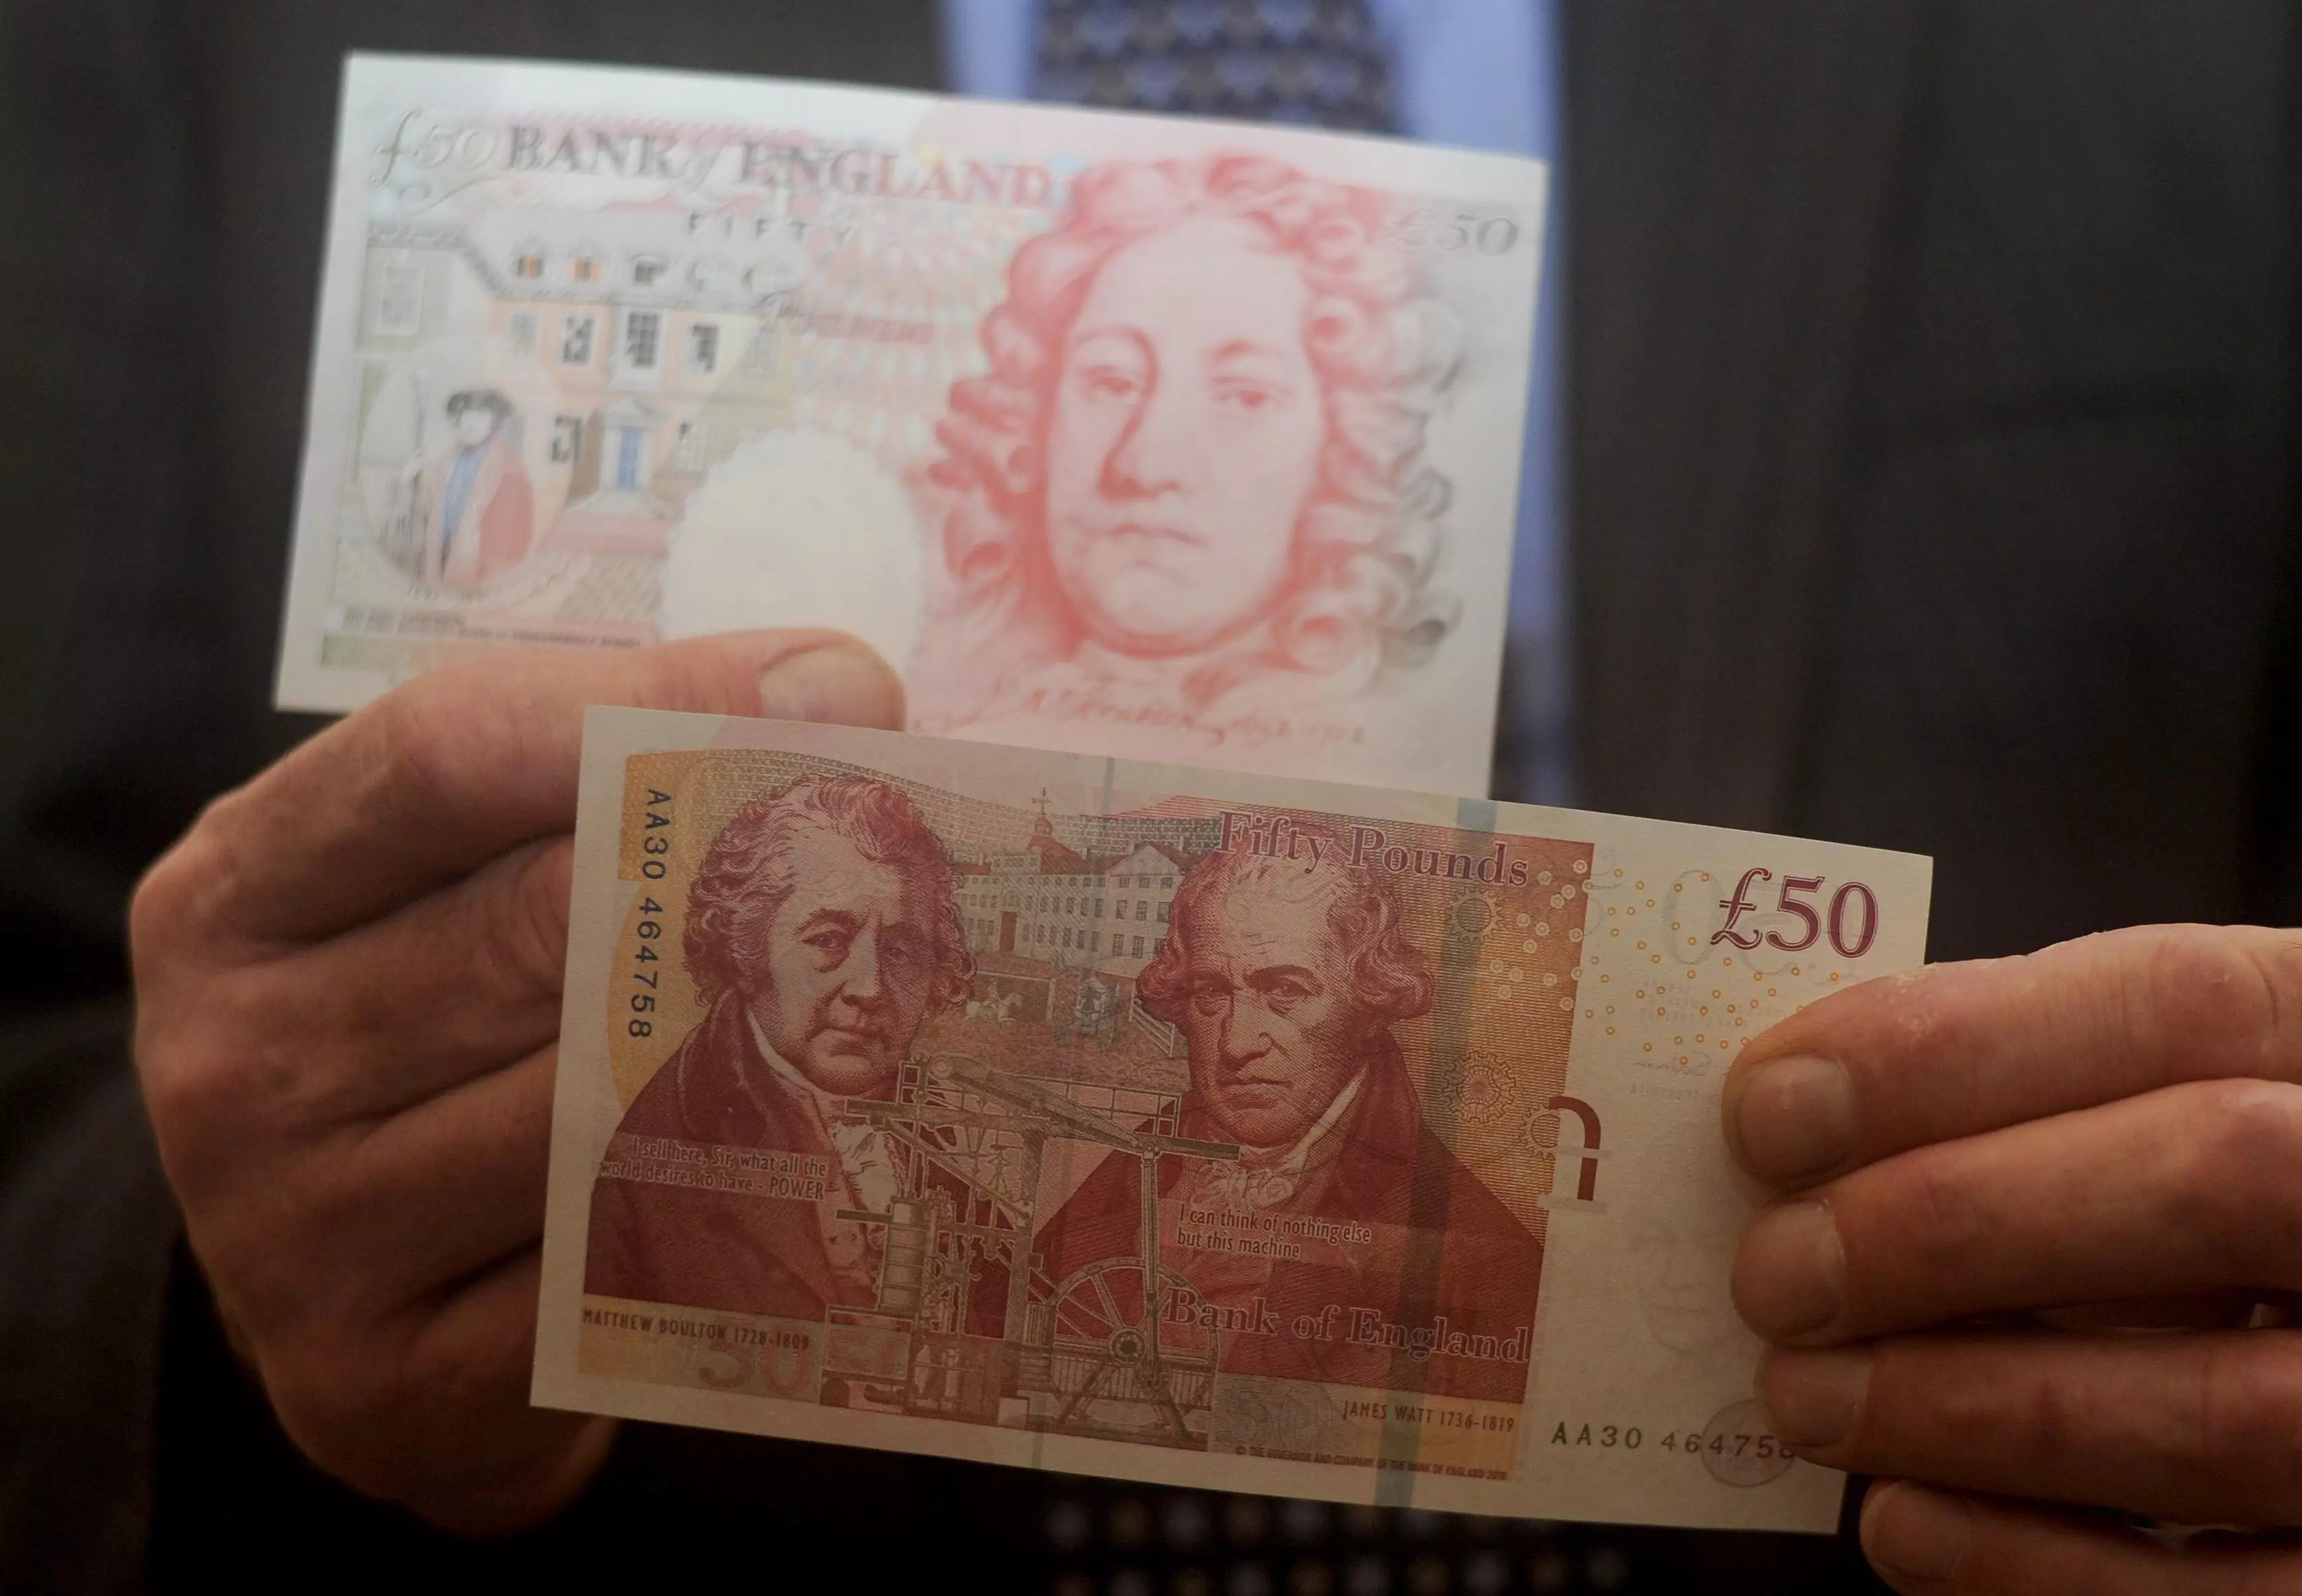 The current £50 bank note was issued in 2011 and features portraits of Matthew Boulton and James Watt,